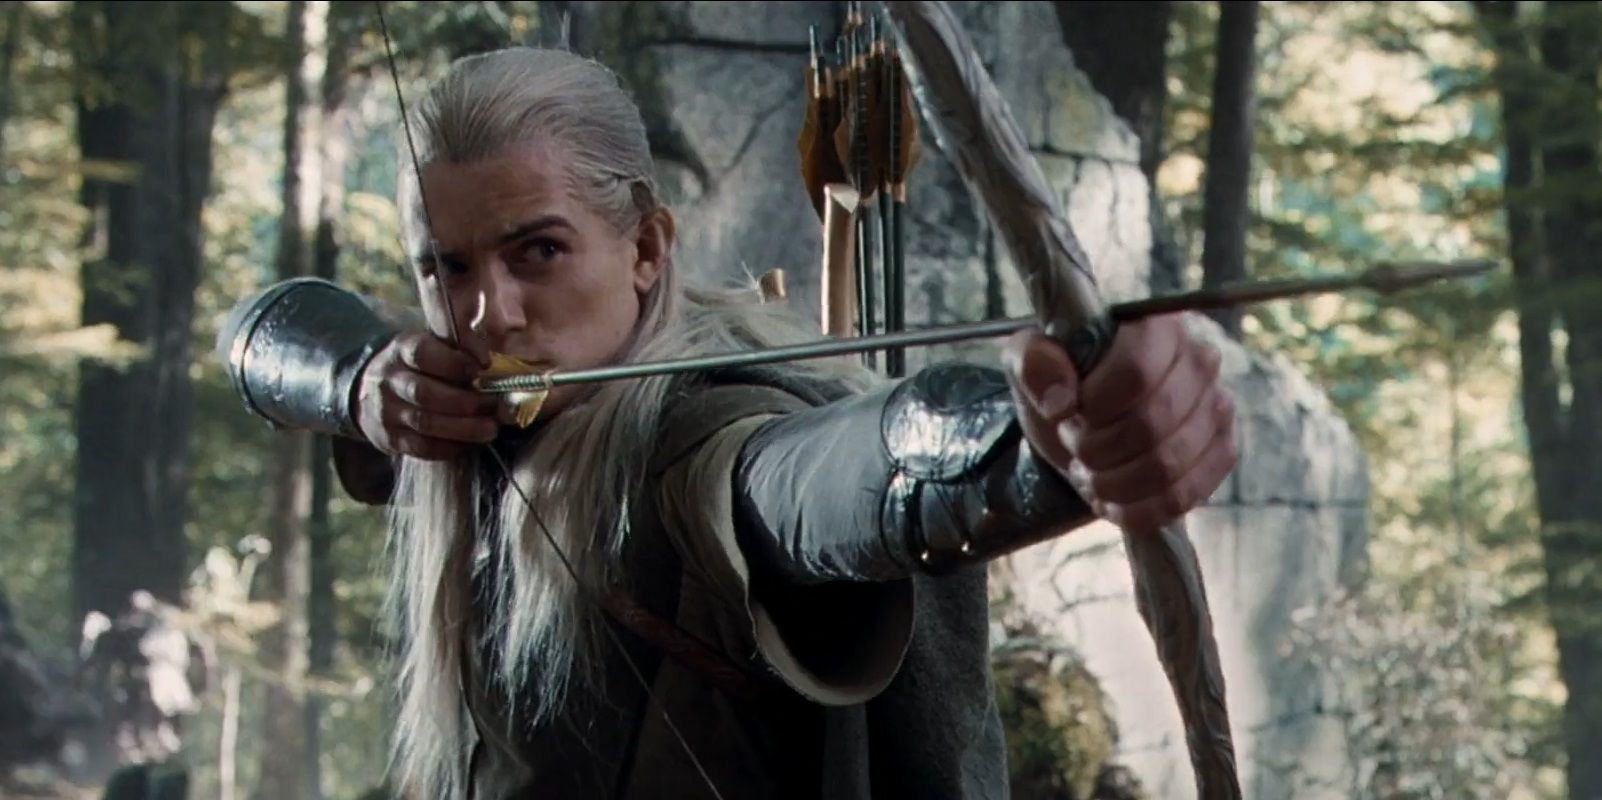 Legolas draws the Bow of the Galadhrim to fire at an Uruk-Hai in Amon Hen